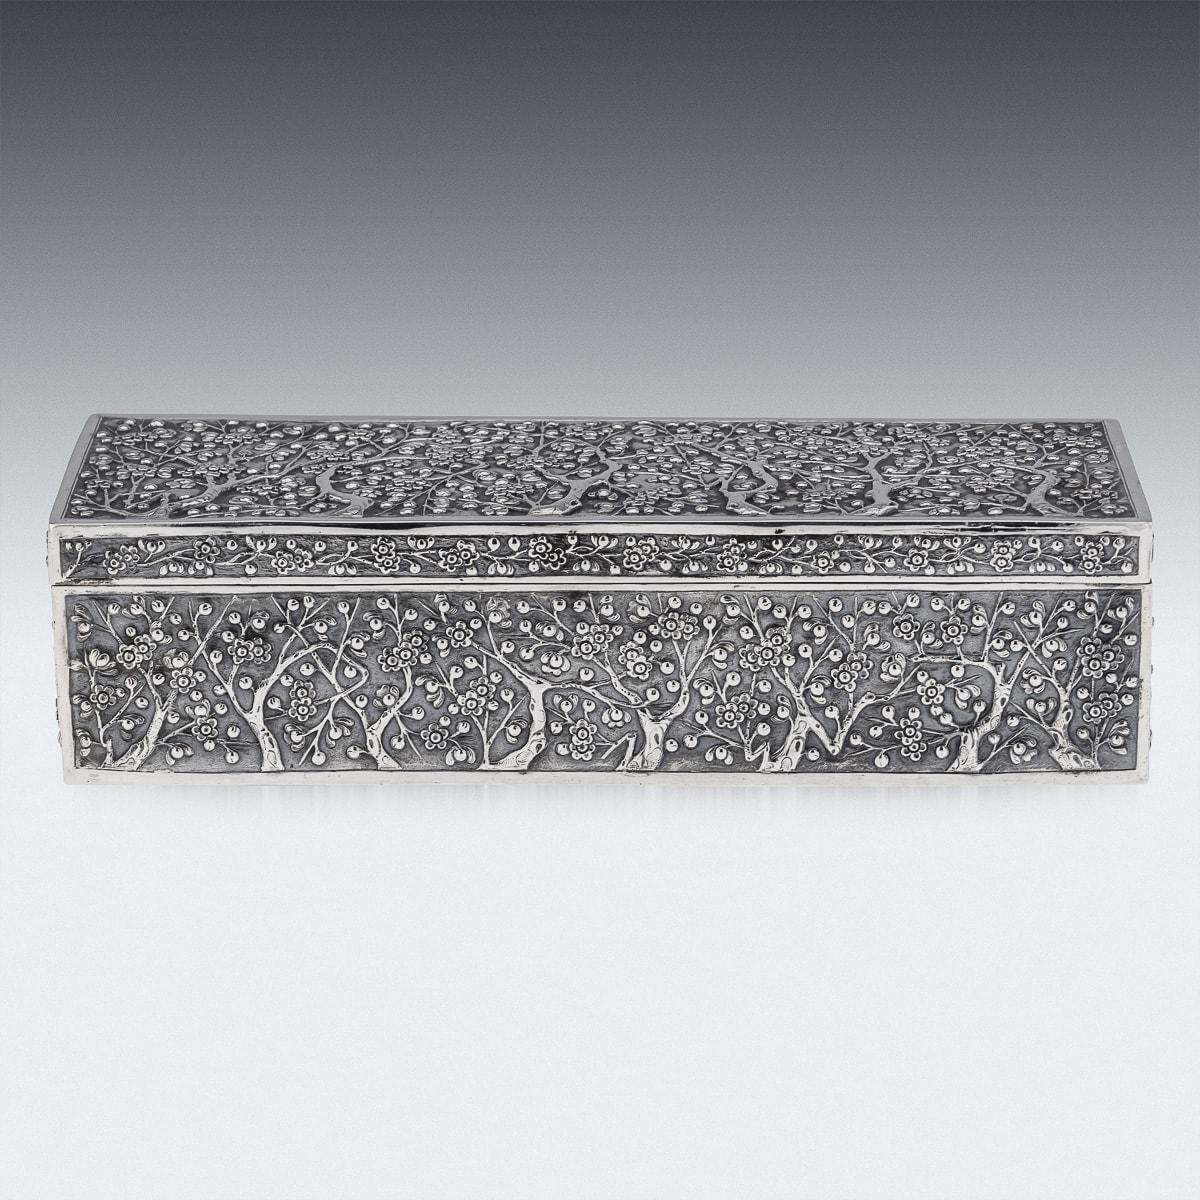 Chinese Export Antique 19th Century Chinese Silver Cherry Blossom Box, Wang Hing 1890 For Sale